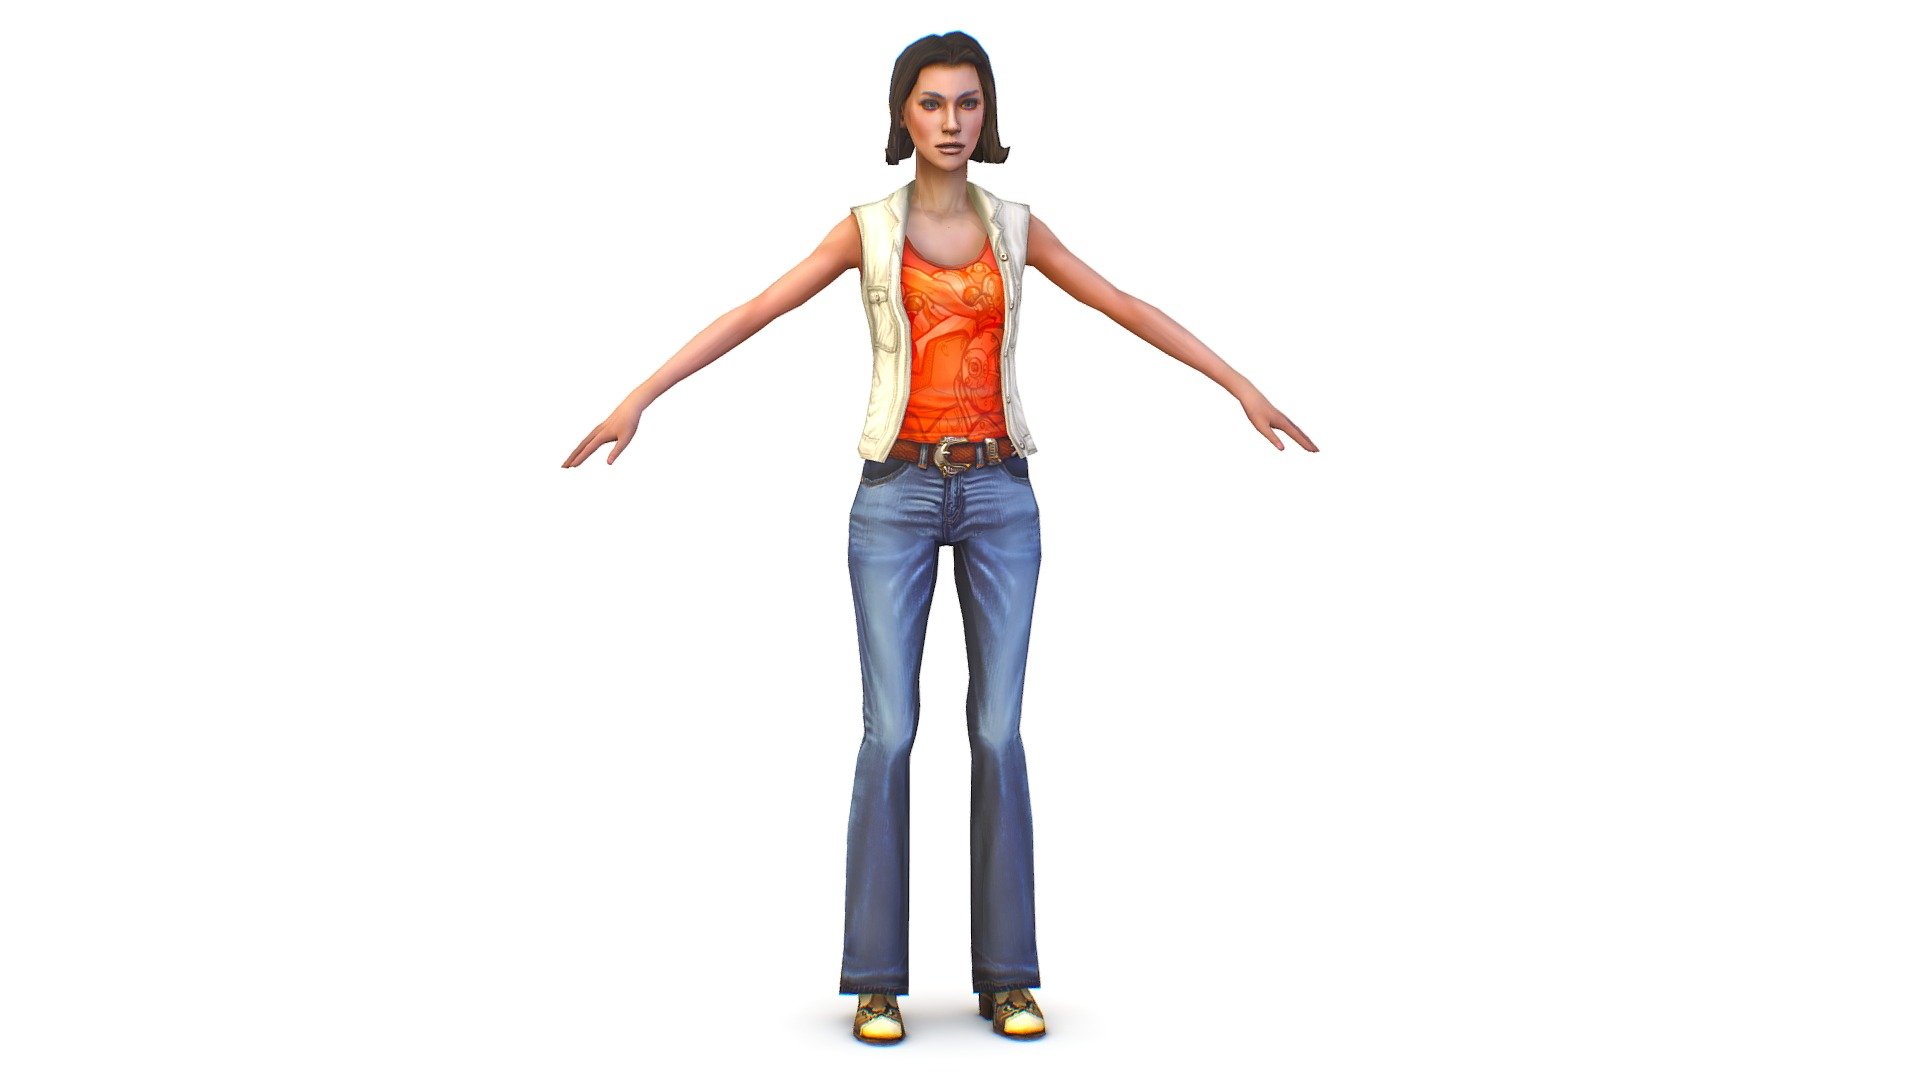 1 color textures 4096x4096

2100 poly count


3dsMax / Maya file included




Support me on Patreon, please - https://www.patreon.com/art_book


 - A young girl in In jeans and a vest - Buy Royalty Free 3D model by Oleg Shuldiakov (@olegshuldiakov) 3d model